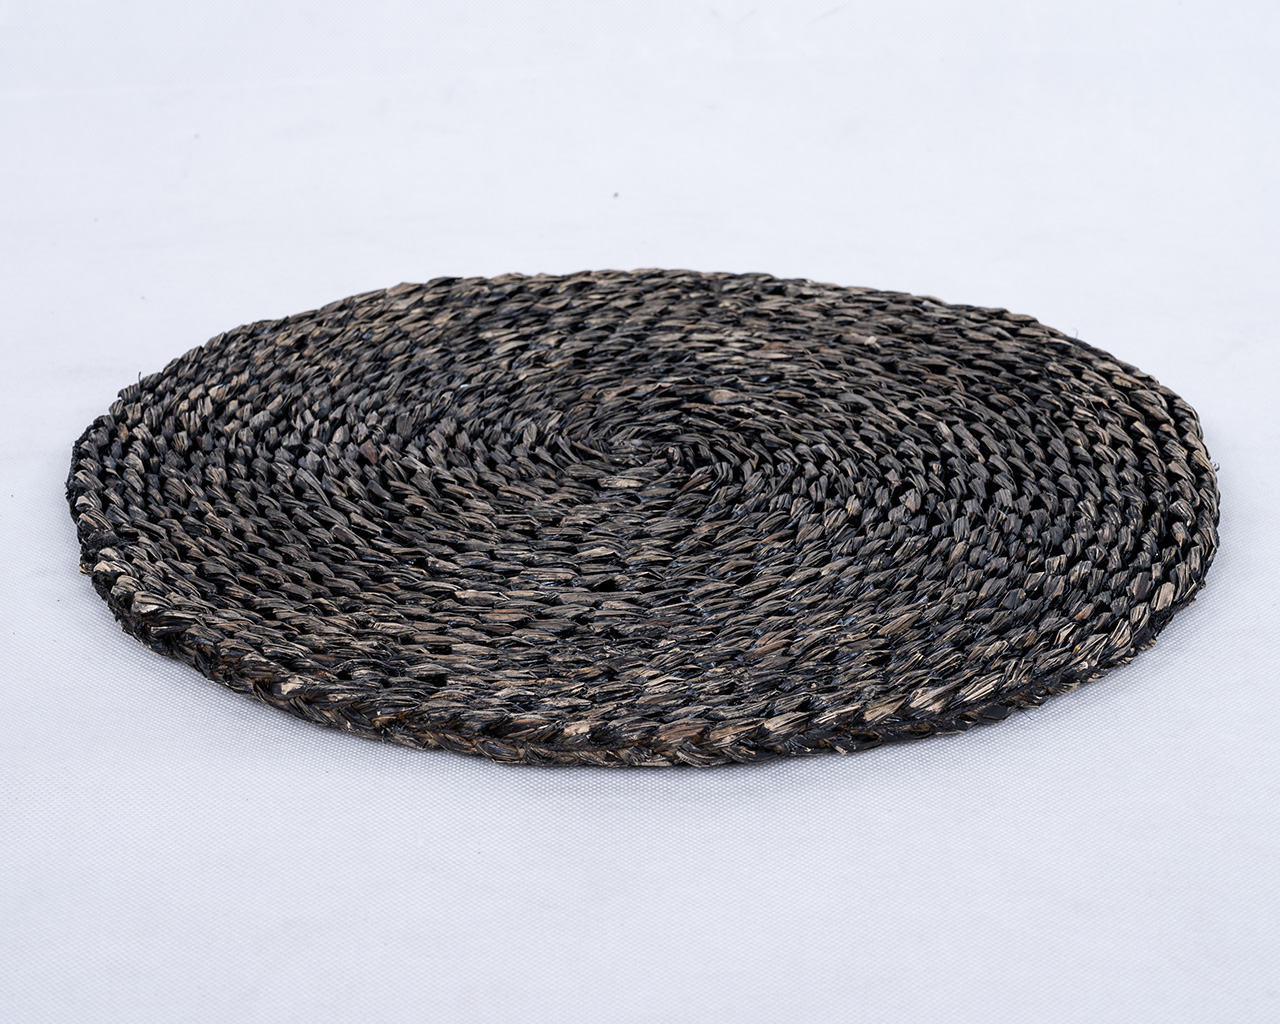 Braided Seagrass Round Placemats Black - 4 Pack, , hi-res image number null